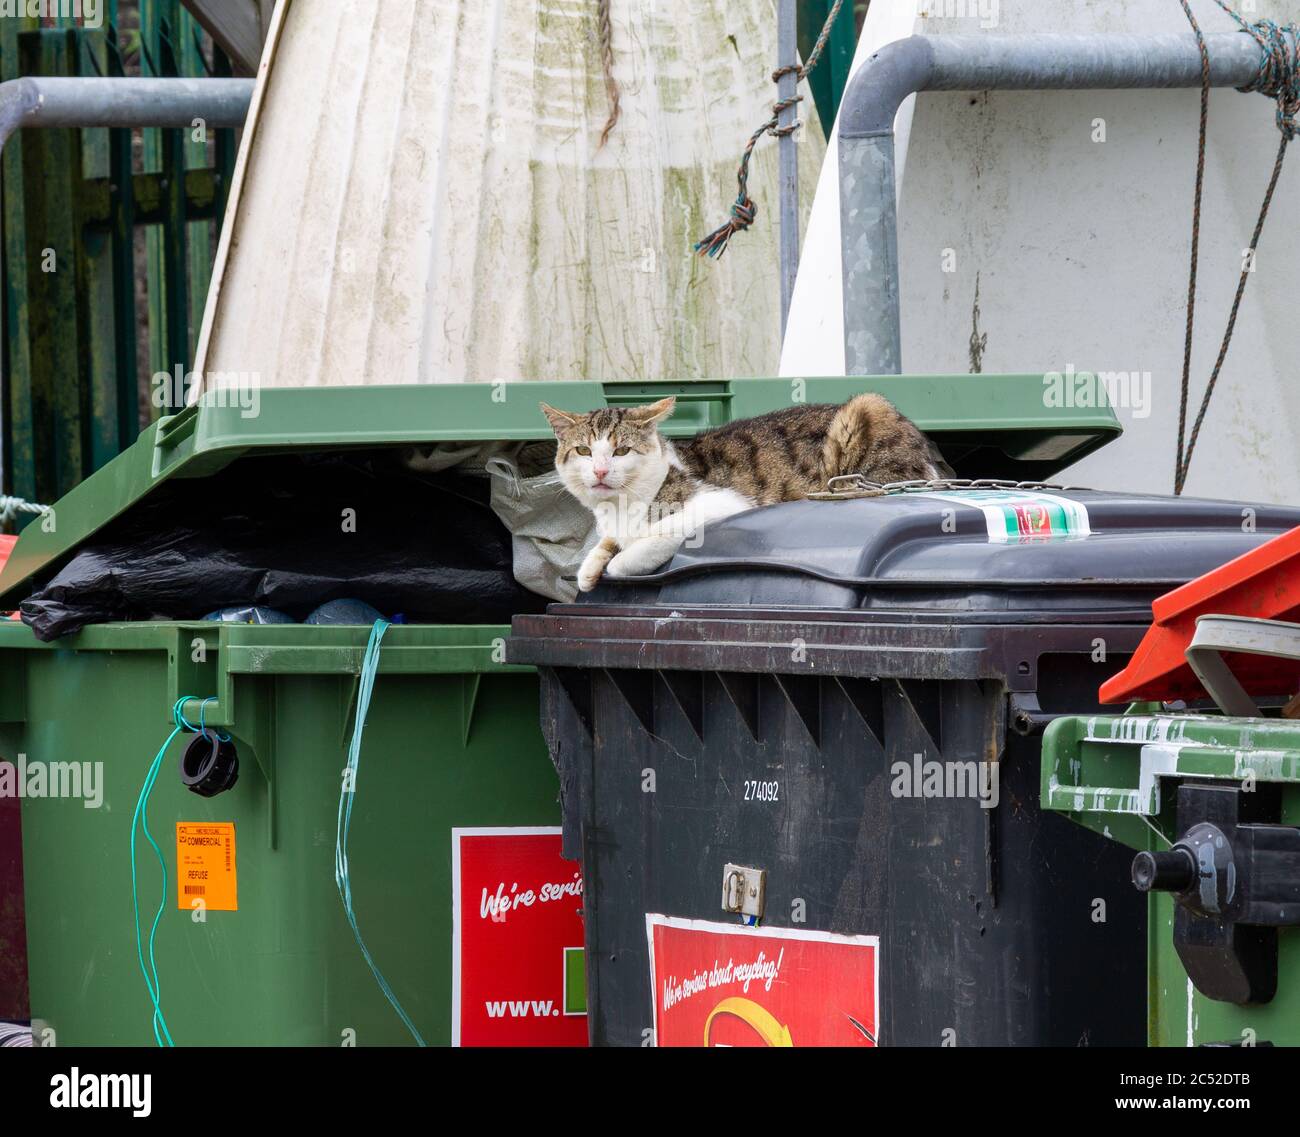 Feral cat sat on rubbish or refuse or garbage bins. Stock Photo